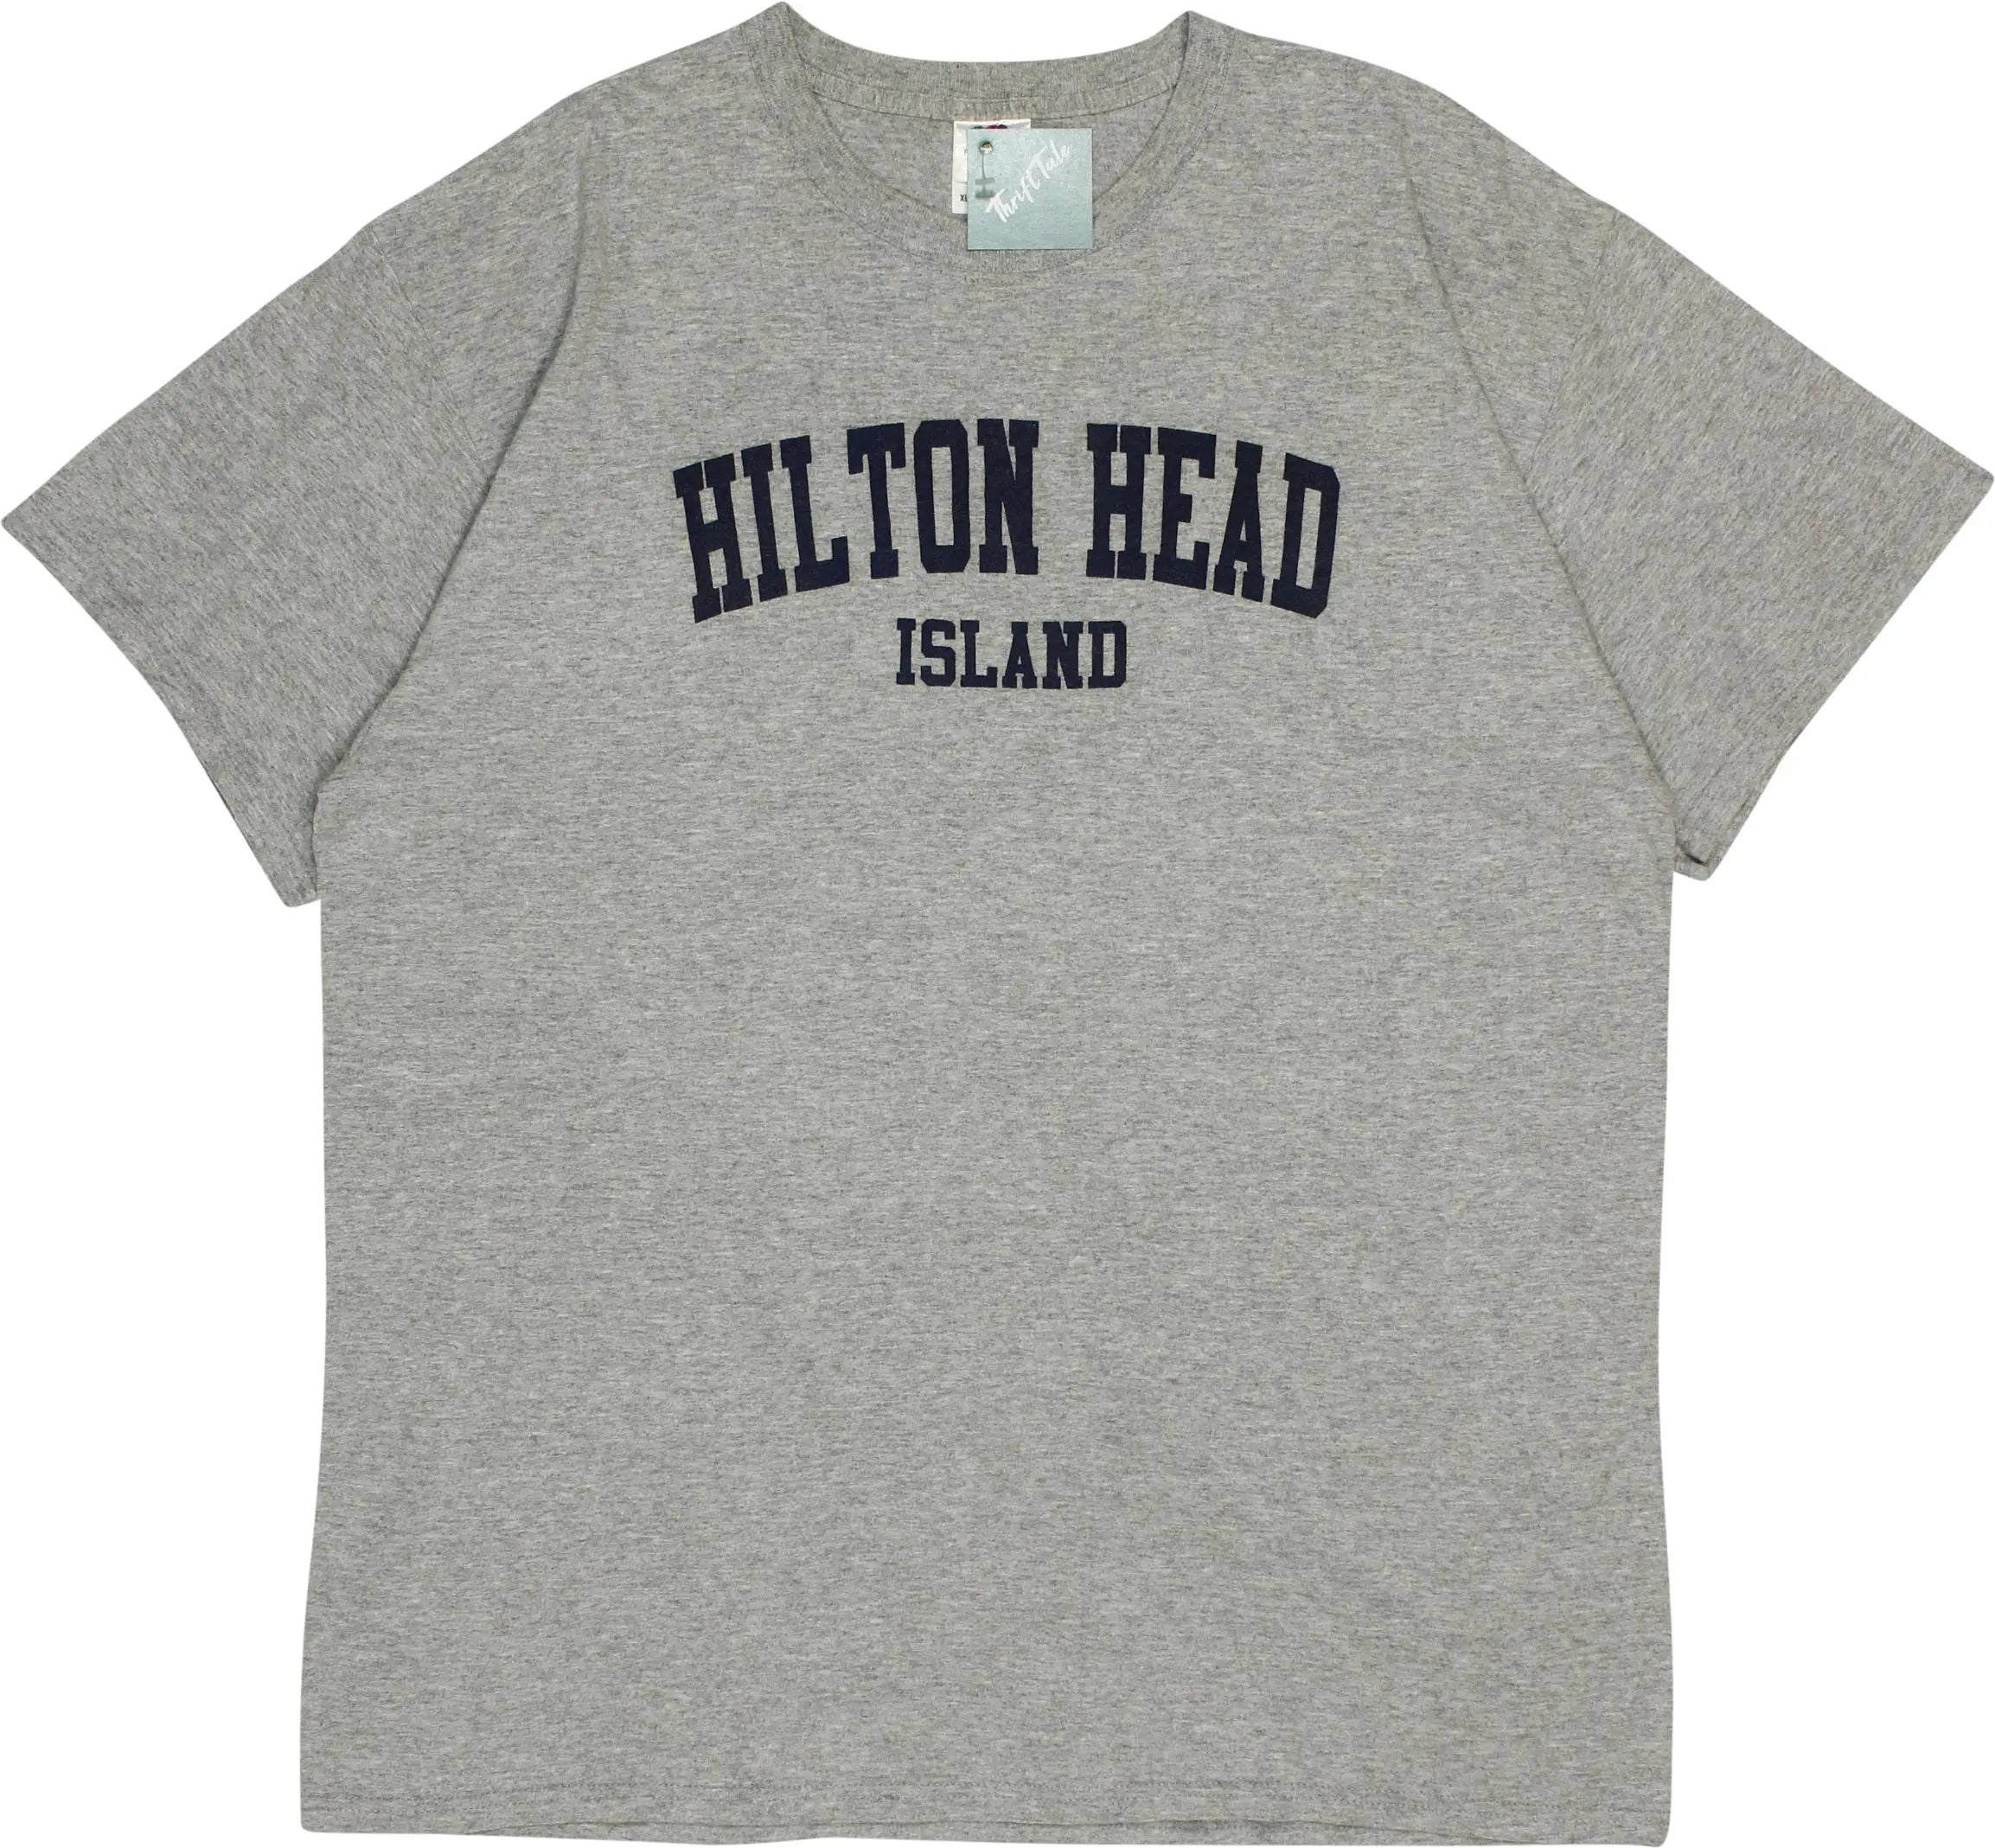 Fruit of the Loom - Hilton Head T-Shirt- ThriftTale.com - Vintage and second handclothing